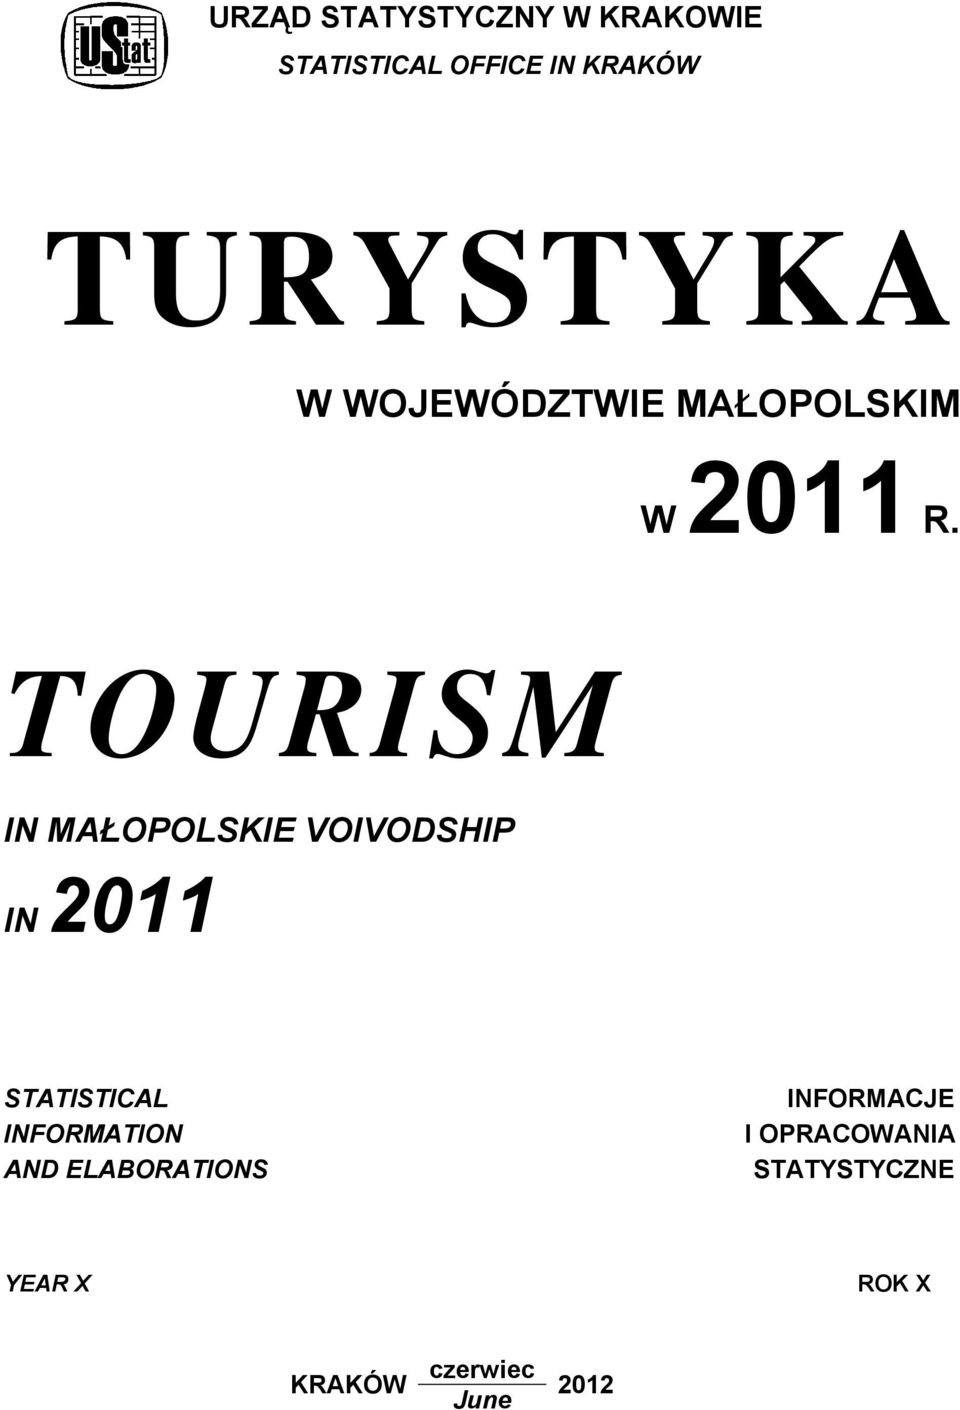 TOURISM IN MAŁOPOLSKIE VOIVODSHIP IN 2011 STATISTICAL INFORMATION